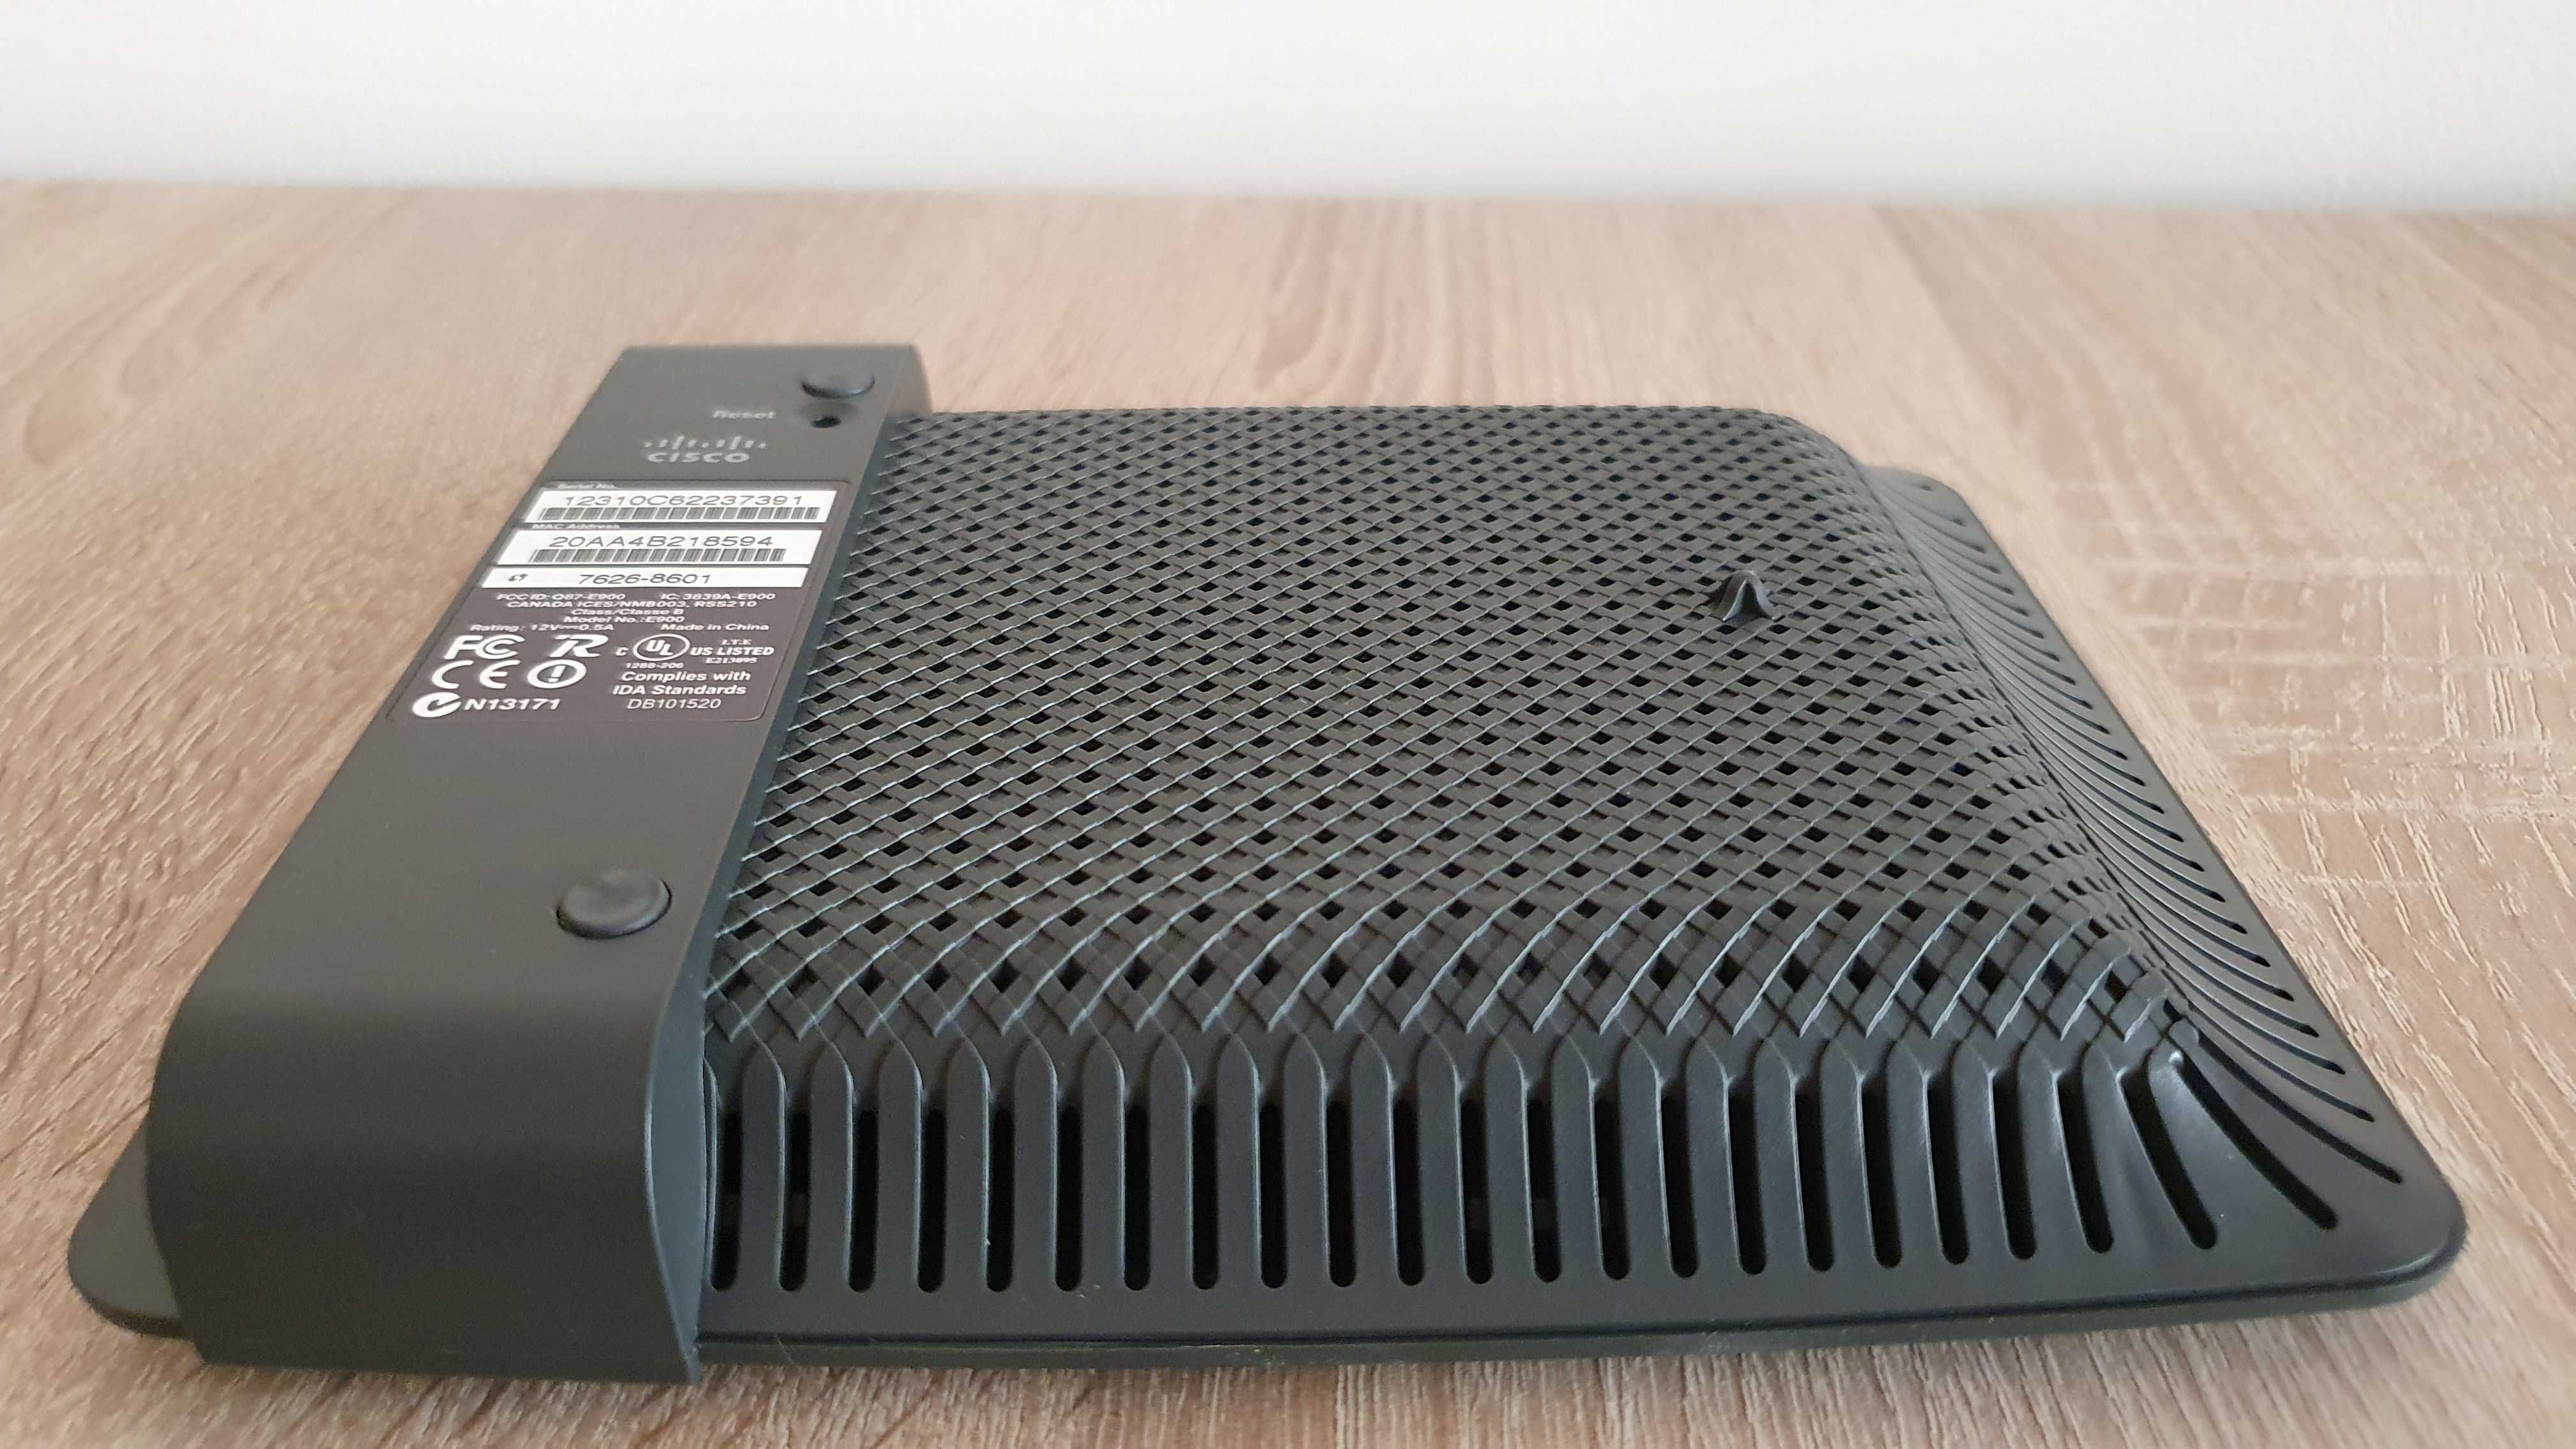 router Linksys E900 - wireless N300